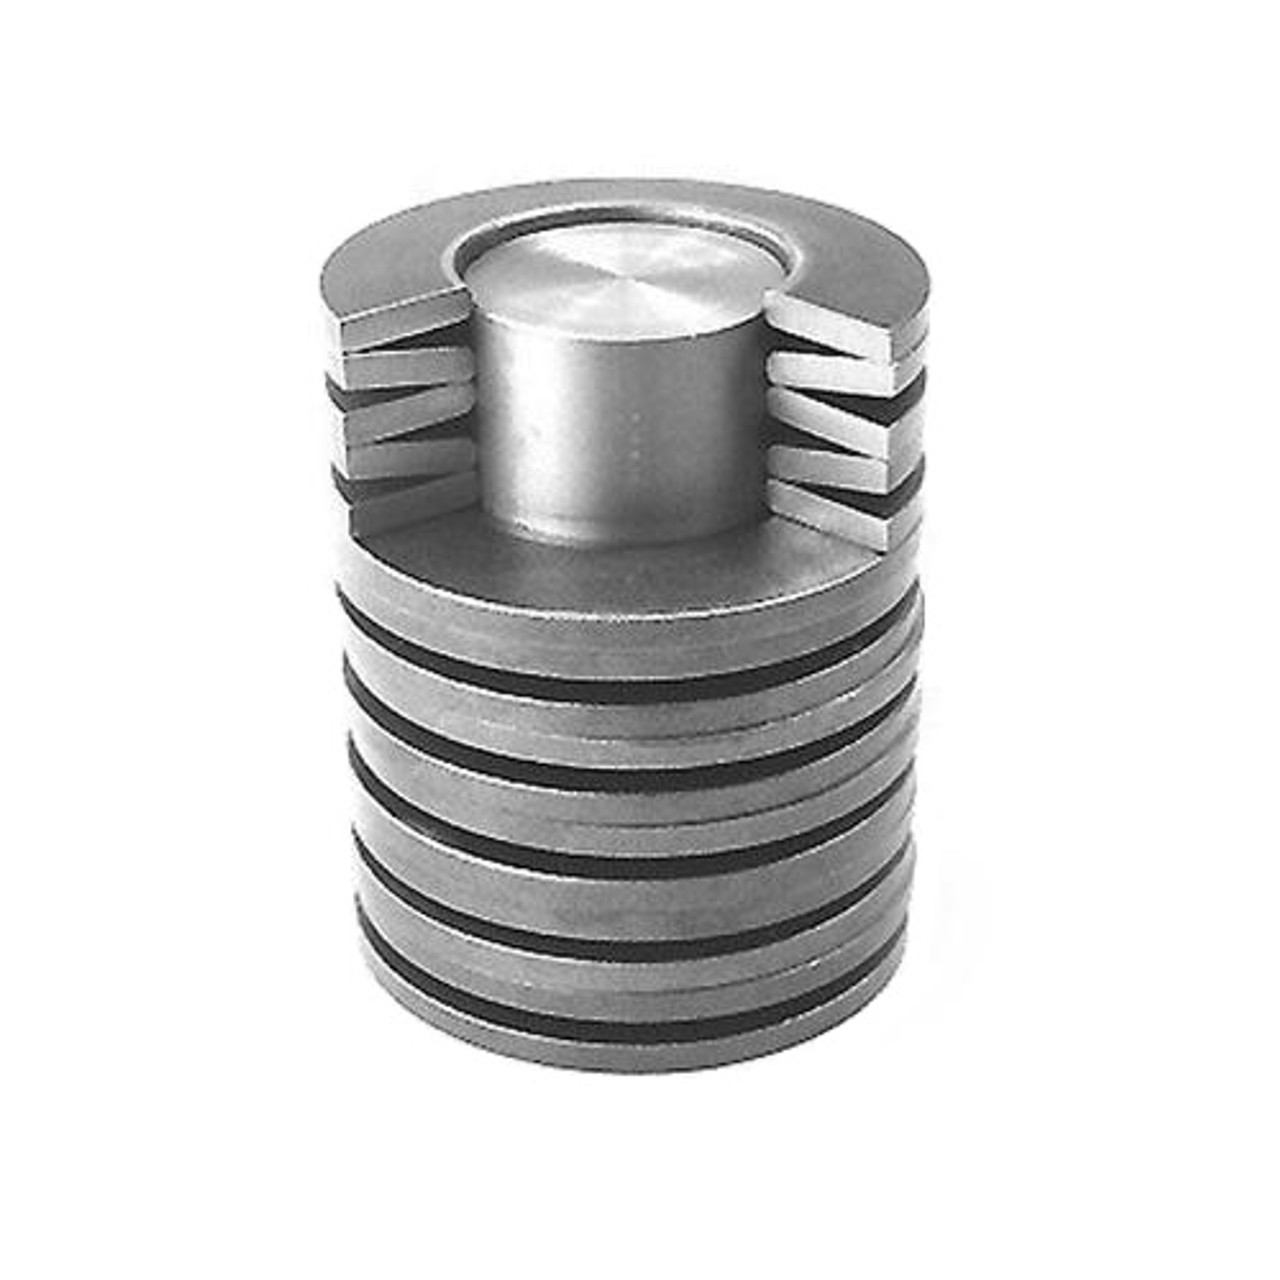 8mm Disc Spring (DIN 2093) Conical Washer  DS008.2-020-09